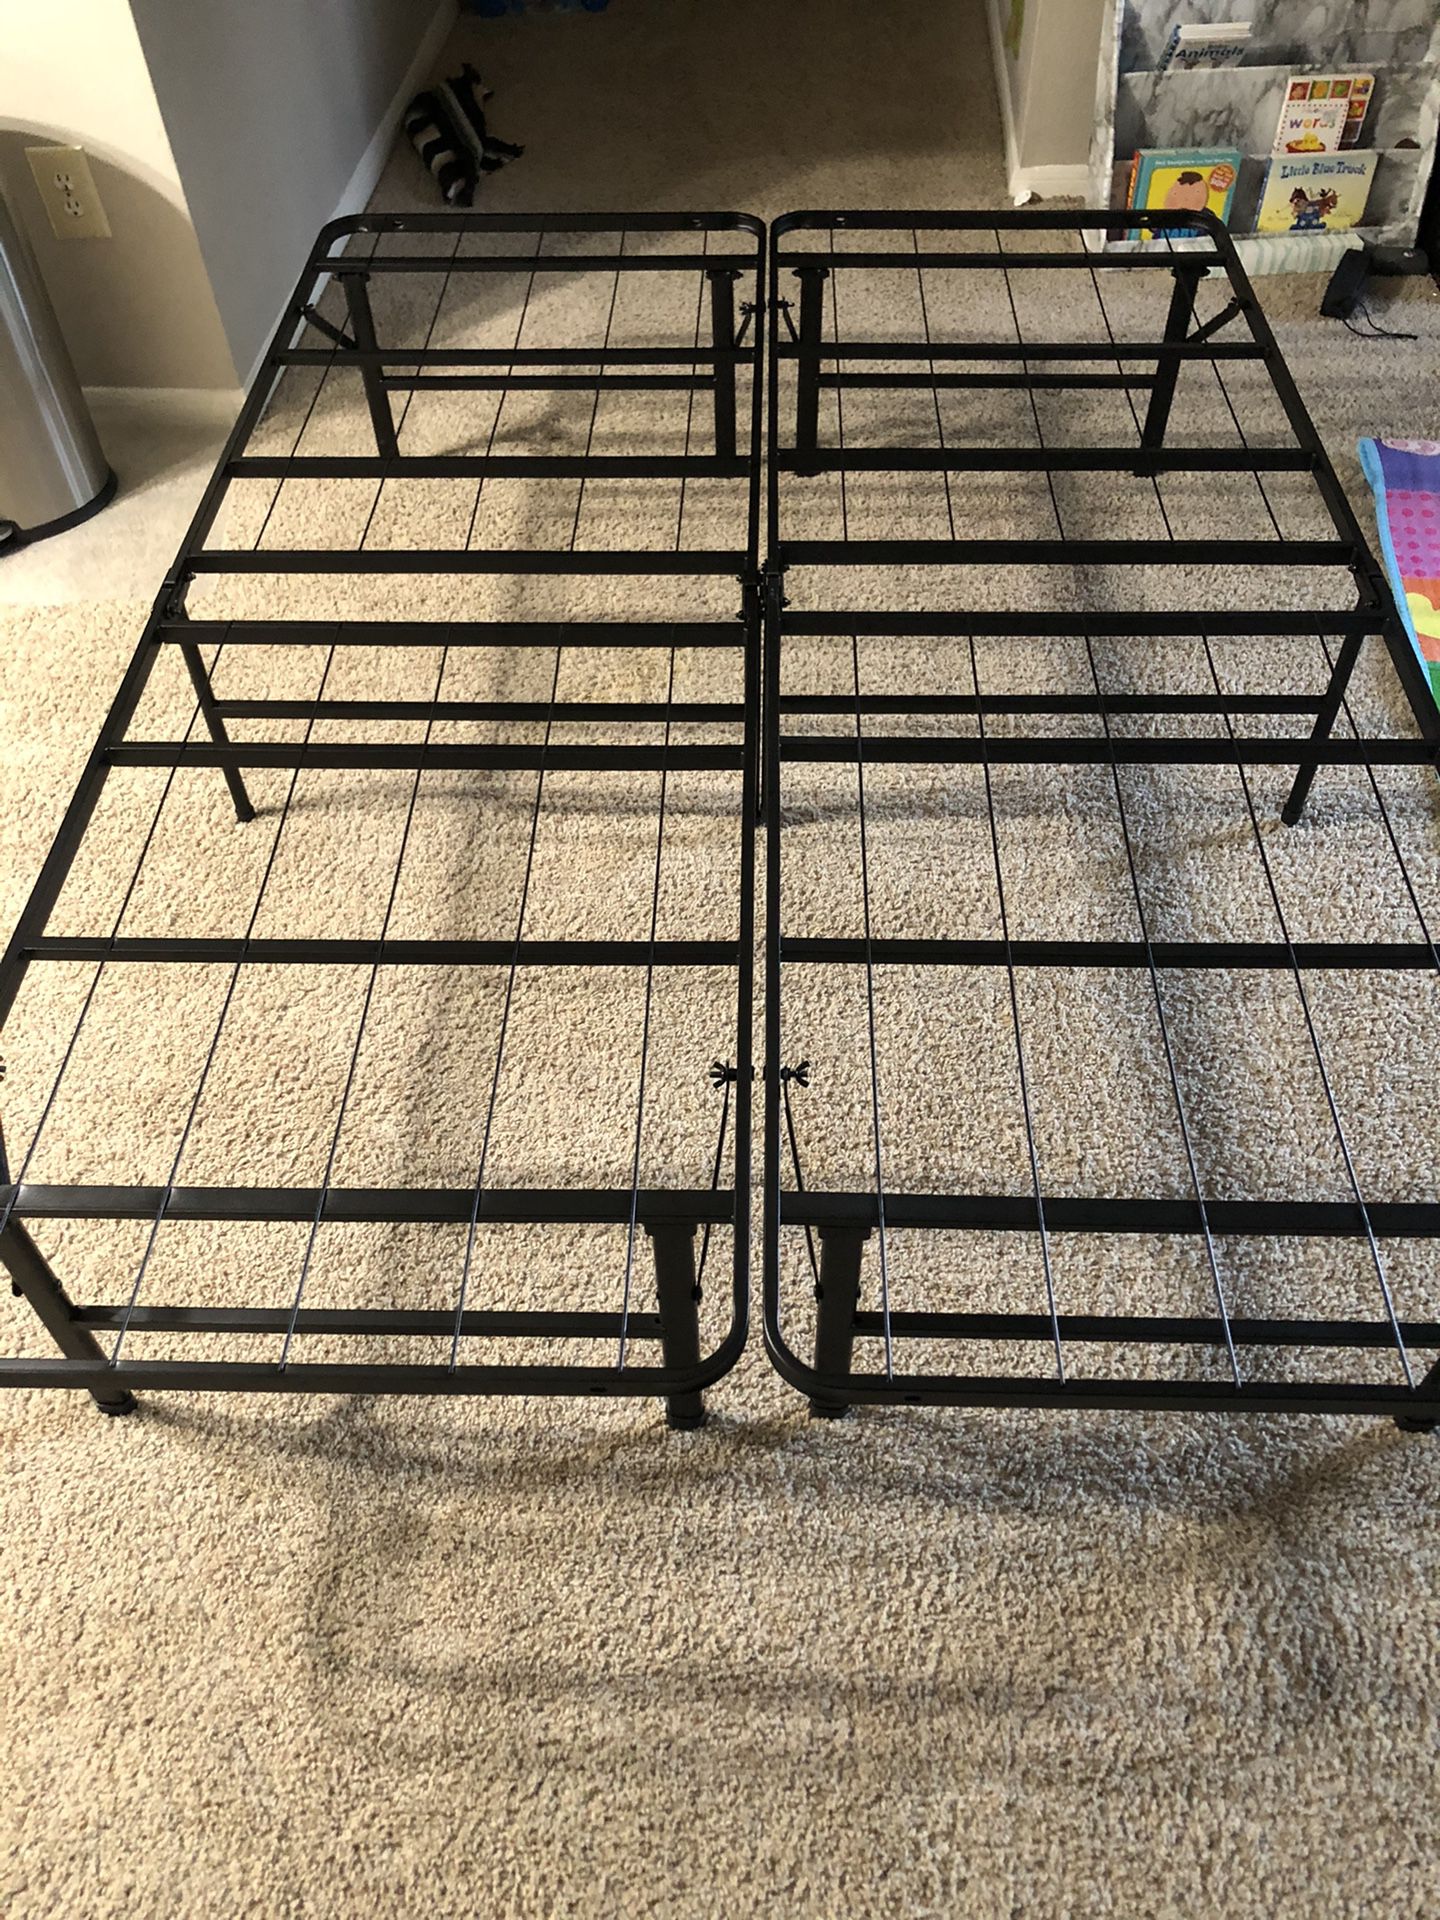 New bed frame full size never used, 14 inches high can give lots of storage space.